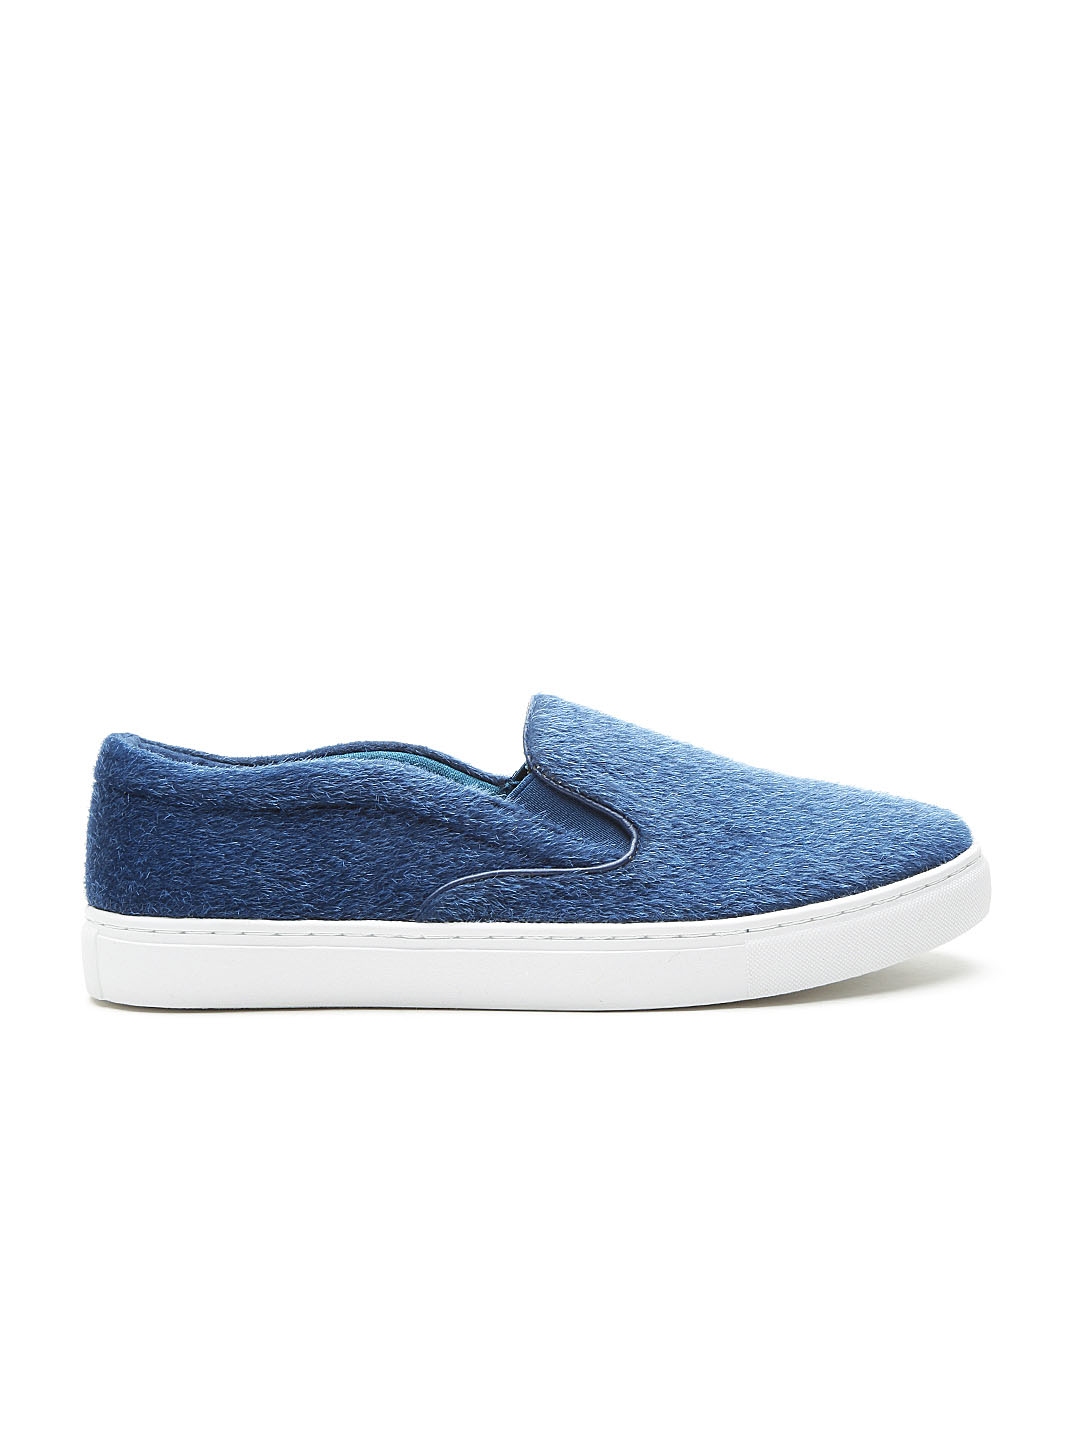 Buy Qupid Women Teal Blue Solid Regular Slip Ons - Casual Shoes for ...